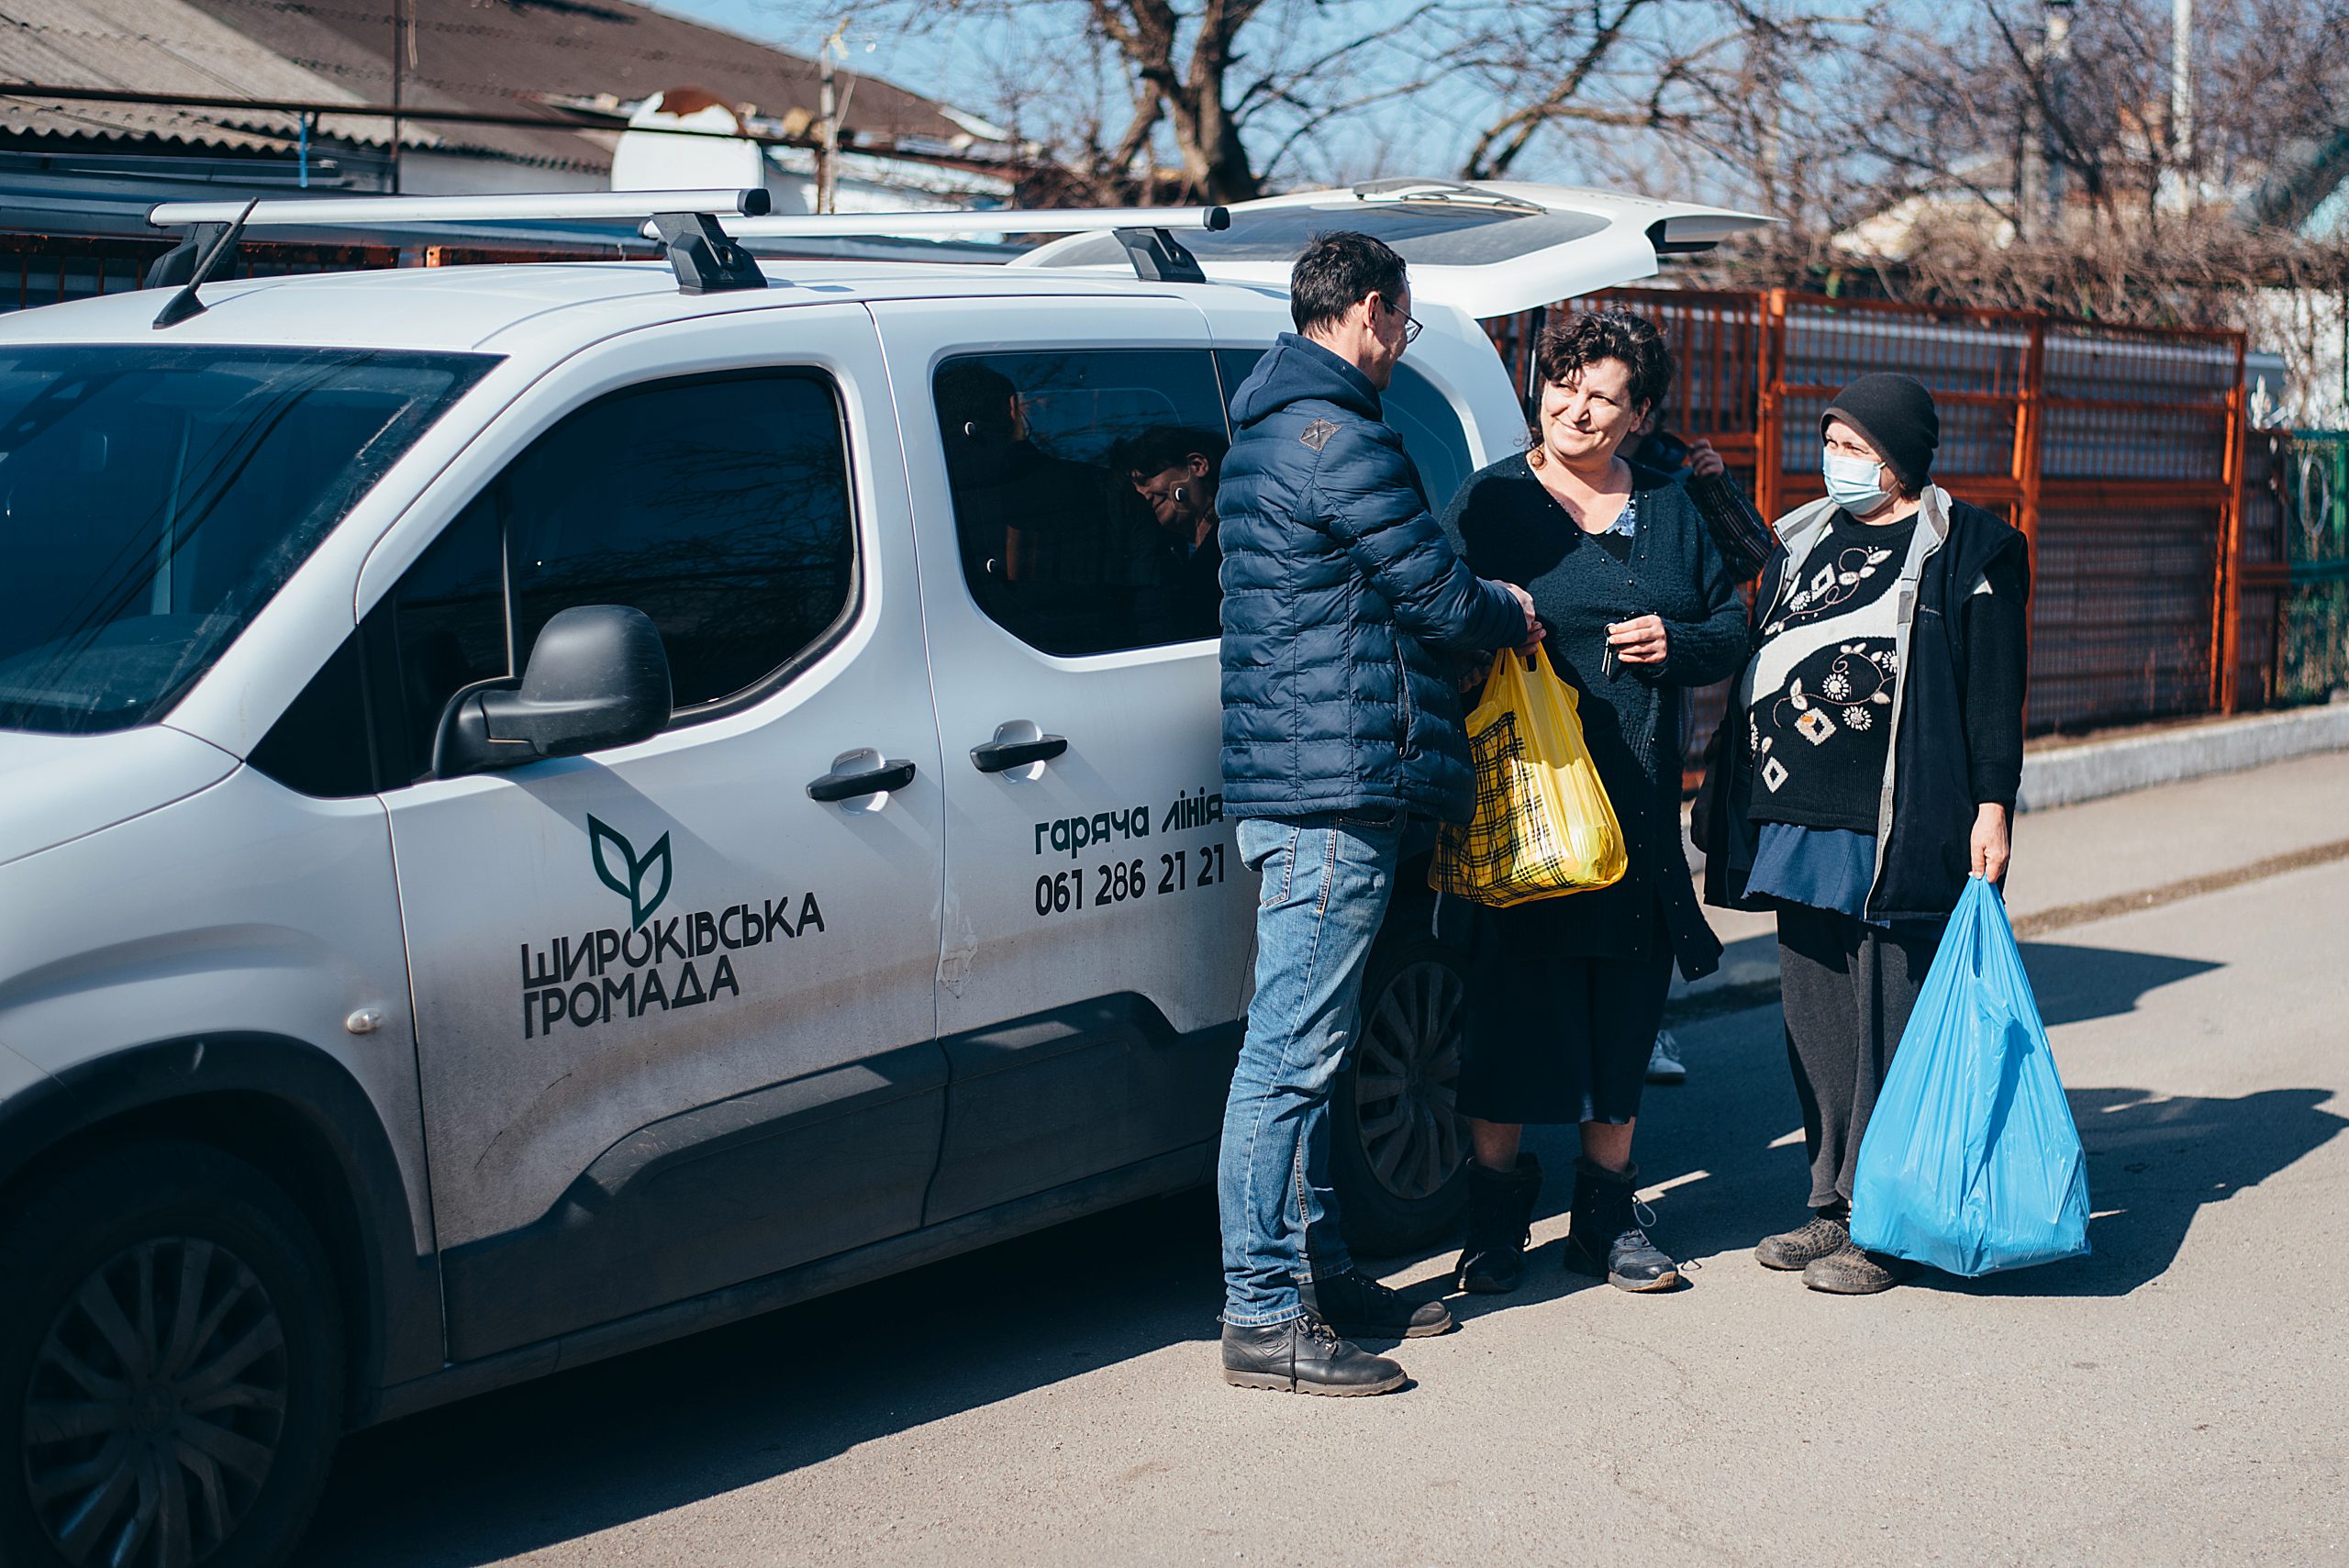 Dmytro Lukyanenko, head of the Centre for Social Services, a community institution, delivers humanitarian aid to displaced persons, March 2022, photo by Oleksandr Ivchyk